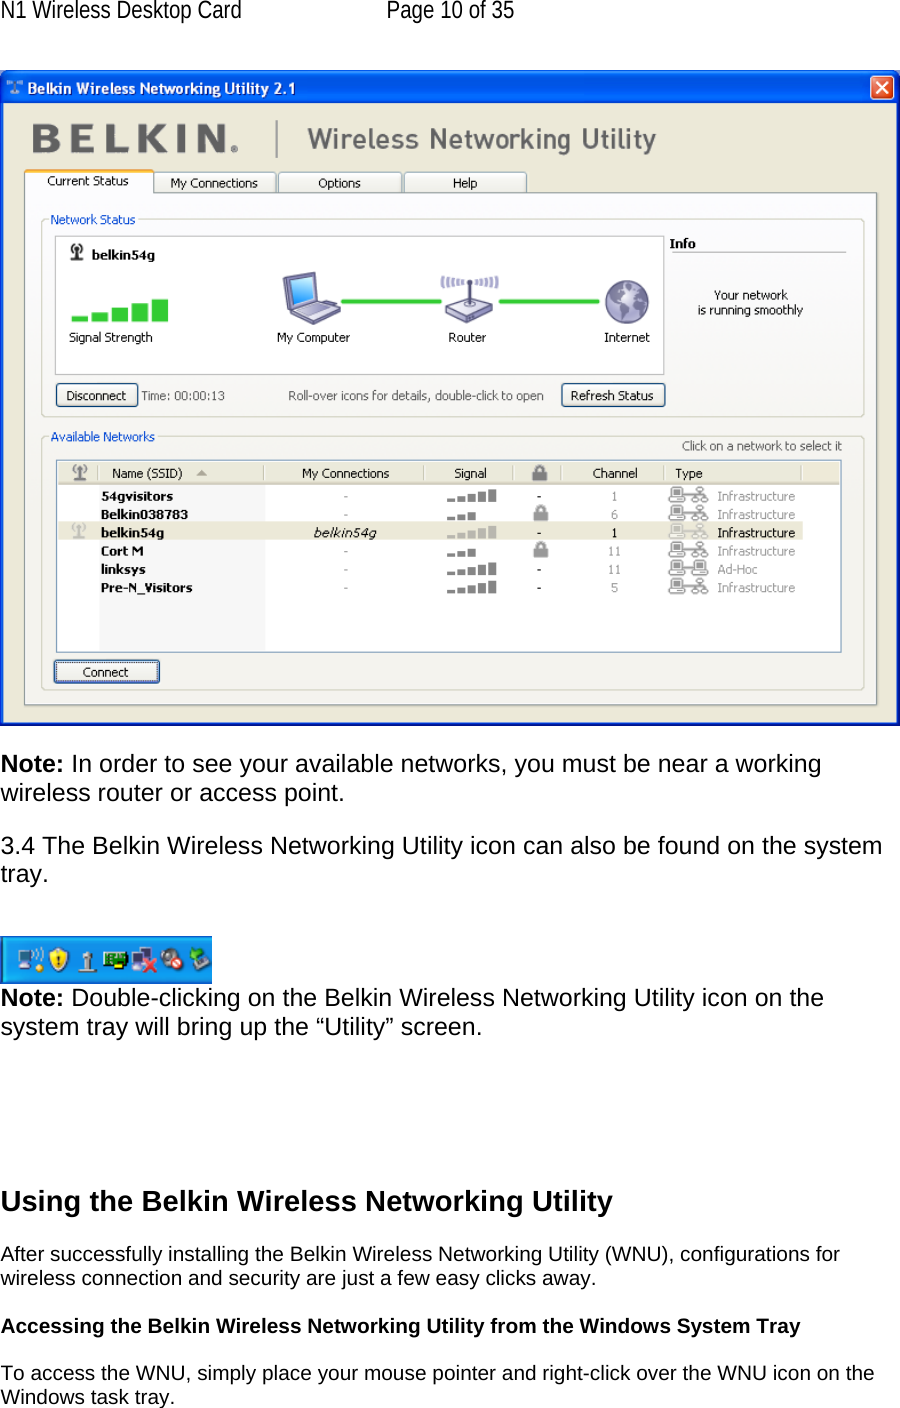 N1 Wireless Desktop Card  Page 10 of 35   Note: In order to see your available networks, you must be near a working wireless router or access point.  3.4 The Belkin Wireless Networking Utility icon can also be found on the system tray.    Note: Double-clicking on the Belkin Wireless Networking Utility icon on the system tray will bring up the “Utility” screen.       Using the Belkin Wireless Networking Utility   After successfully installing the Belkin Wireless Networking Utility (WNU), configurations for wireless connection and security are just a few easy clicks away.  Accessing the Belkin Wireless Networking Utility from the Windows System Tray  To access the WNU, simply place your mouse pointer and right-click over the WNU icon on the Windows task tray.  